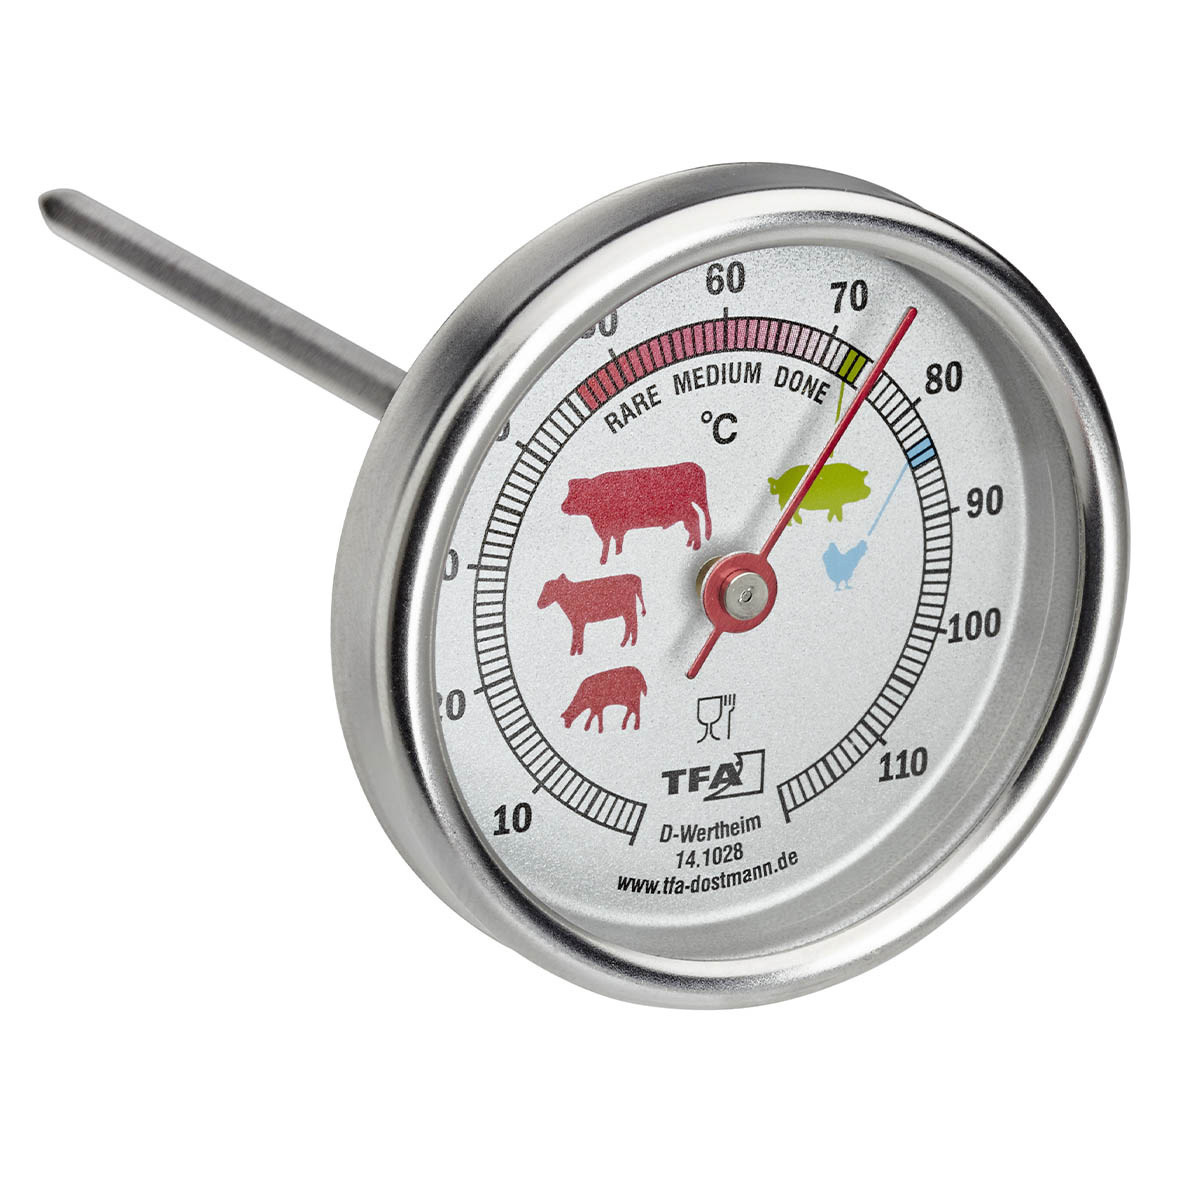 14-1028-analoges-bratenthermometer-1200x1200px.jpg